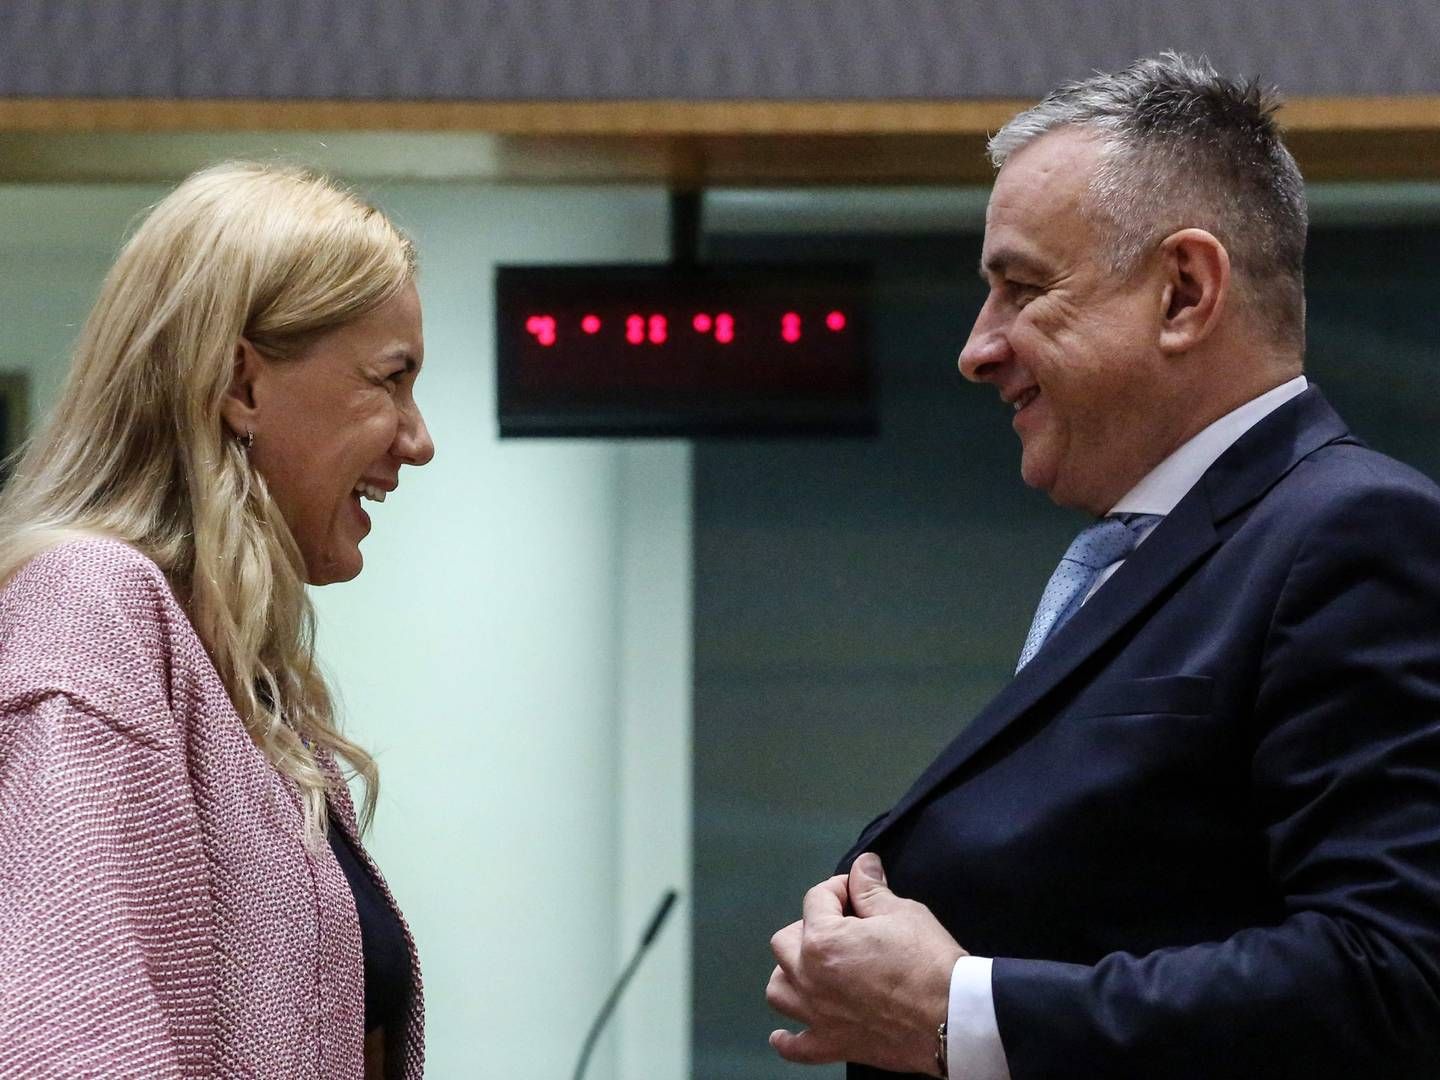 EU Commissioner for Energy Kadri Simson and Czech Minister of Industry and Trade Josef Sikeal are expected to end negotiations about a gas price cap in Europe on Monday. | Photo: Valeria Mongelli